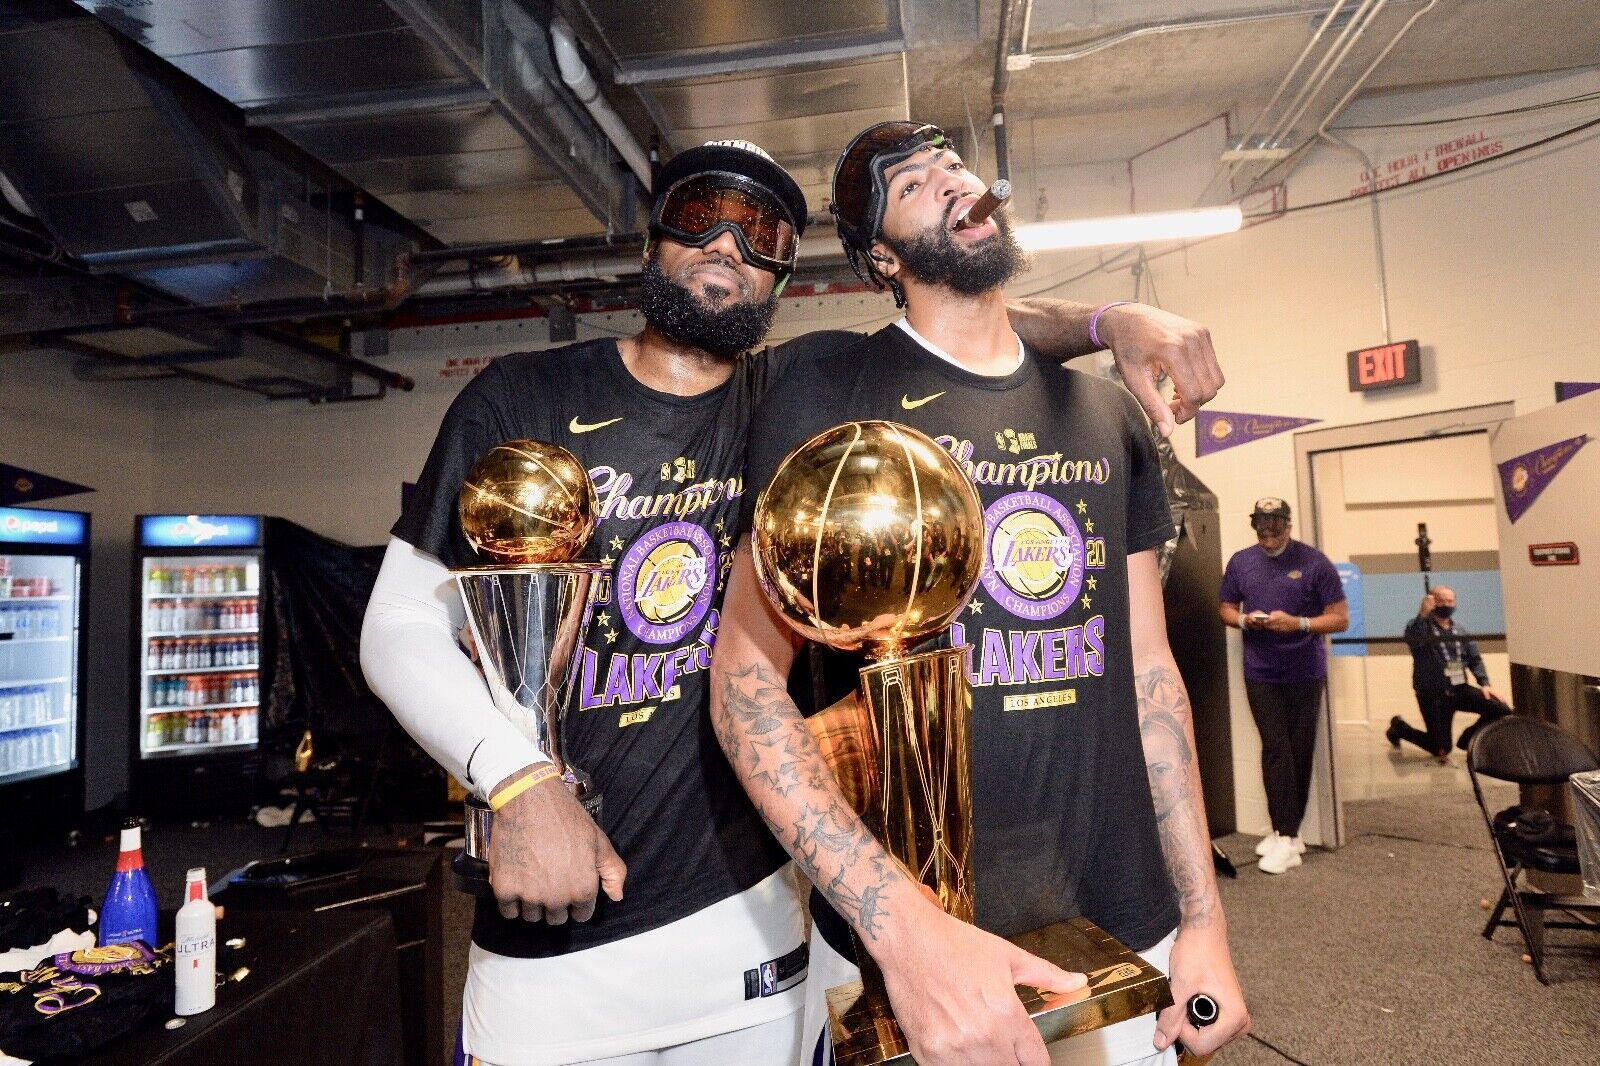 Lebron James Anthony Davis Lakers Championship 2020 Finals Poster 12x18 Photo Poster painting